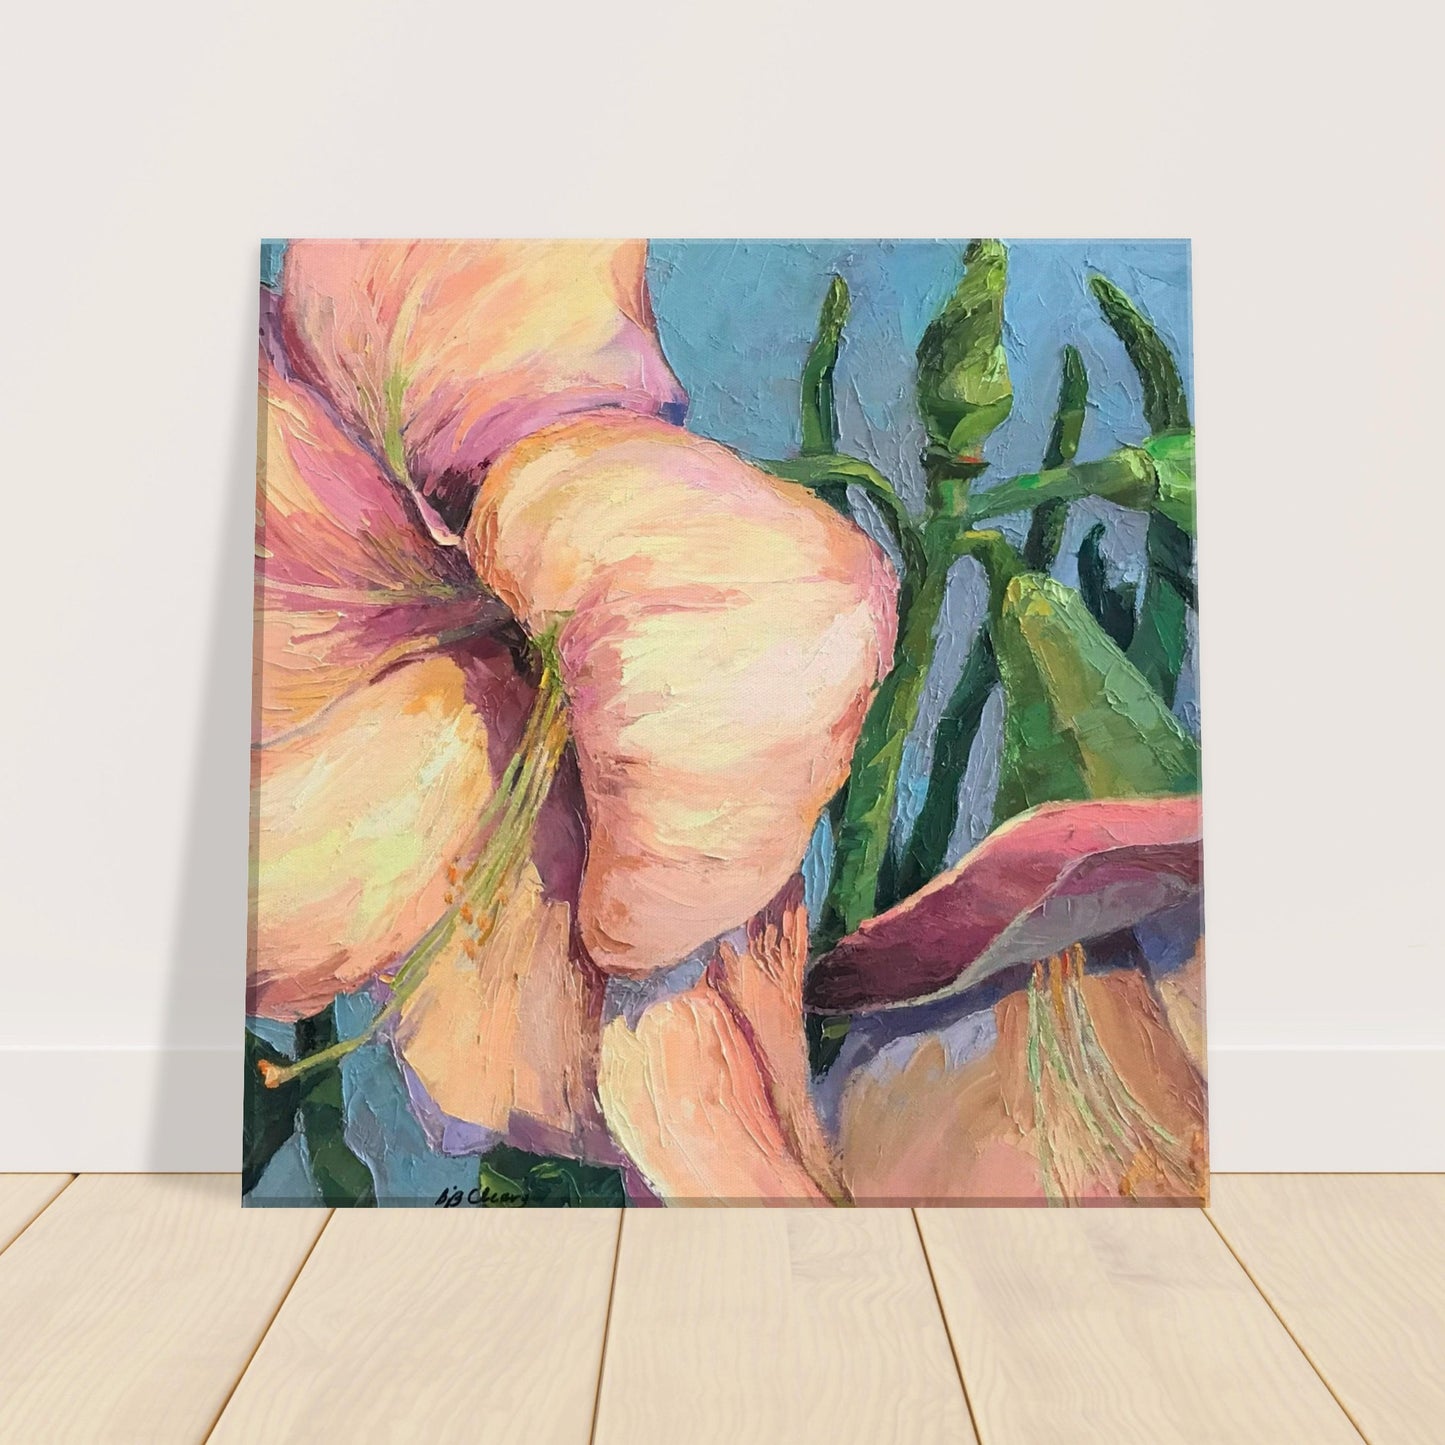 "Amaryllis 2" Floral Print 12x12 inch on Canvas Barbara Cleary Designs